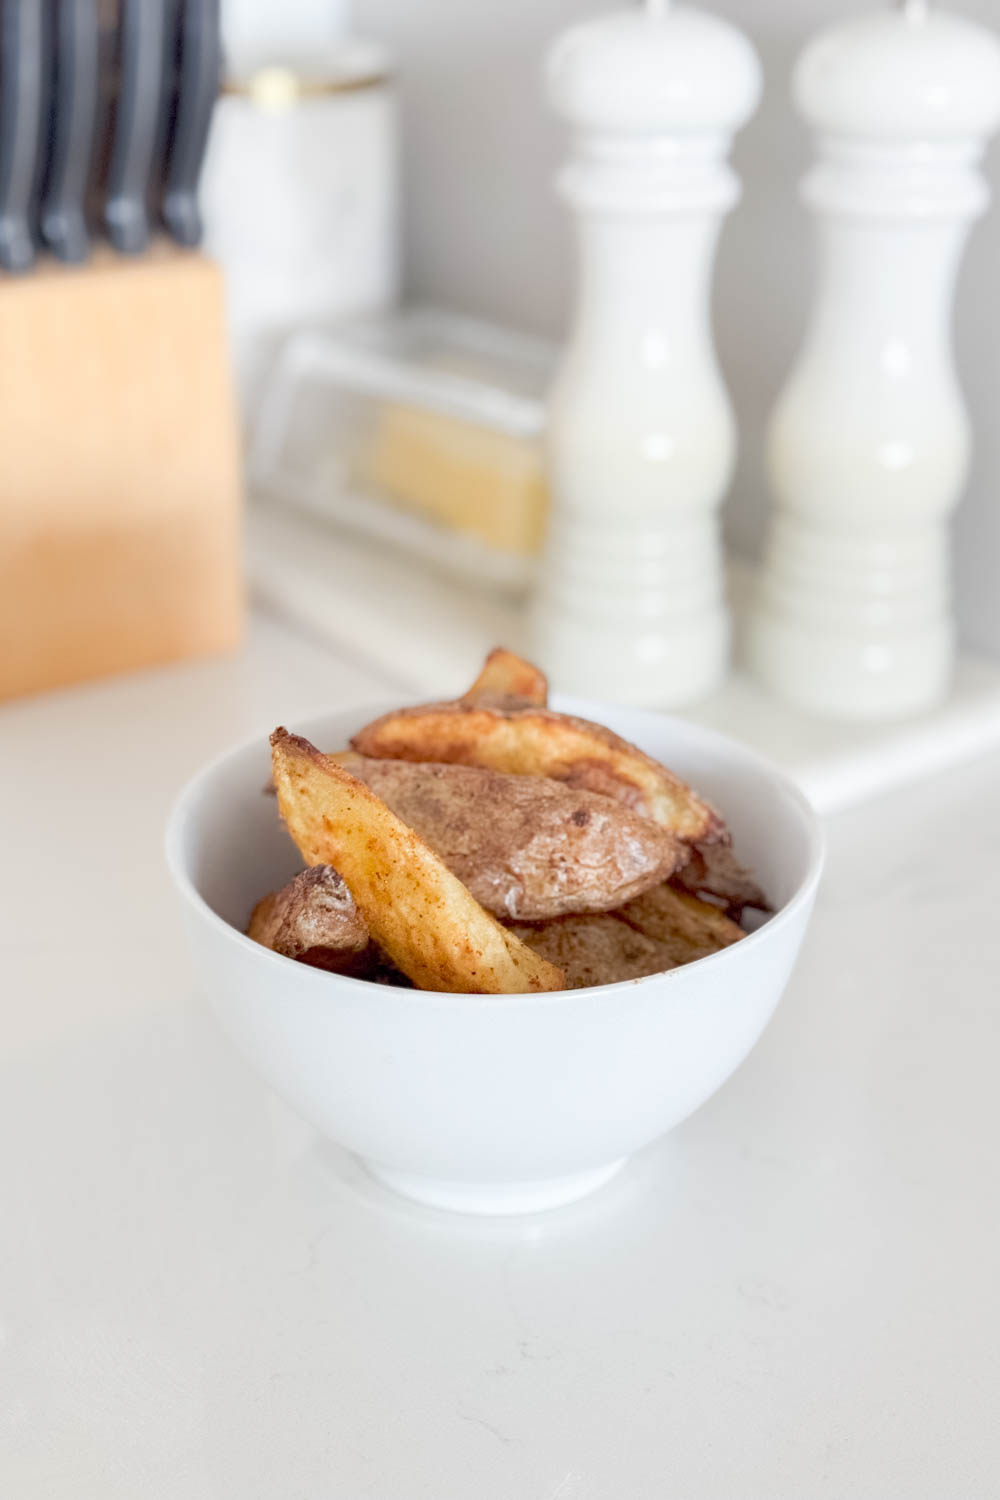 Homemade potato wedges in a white bowl, sitting on a marble counter